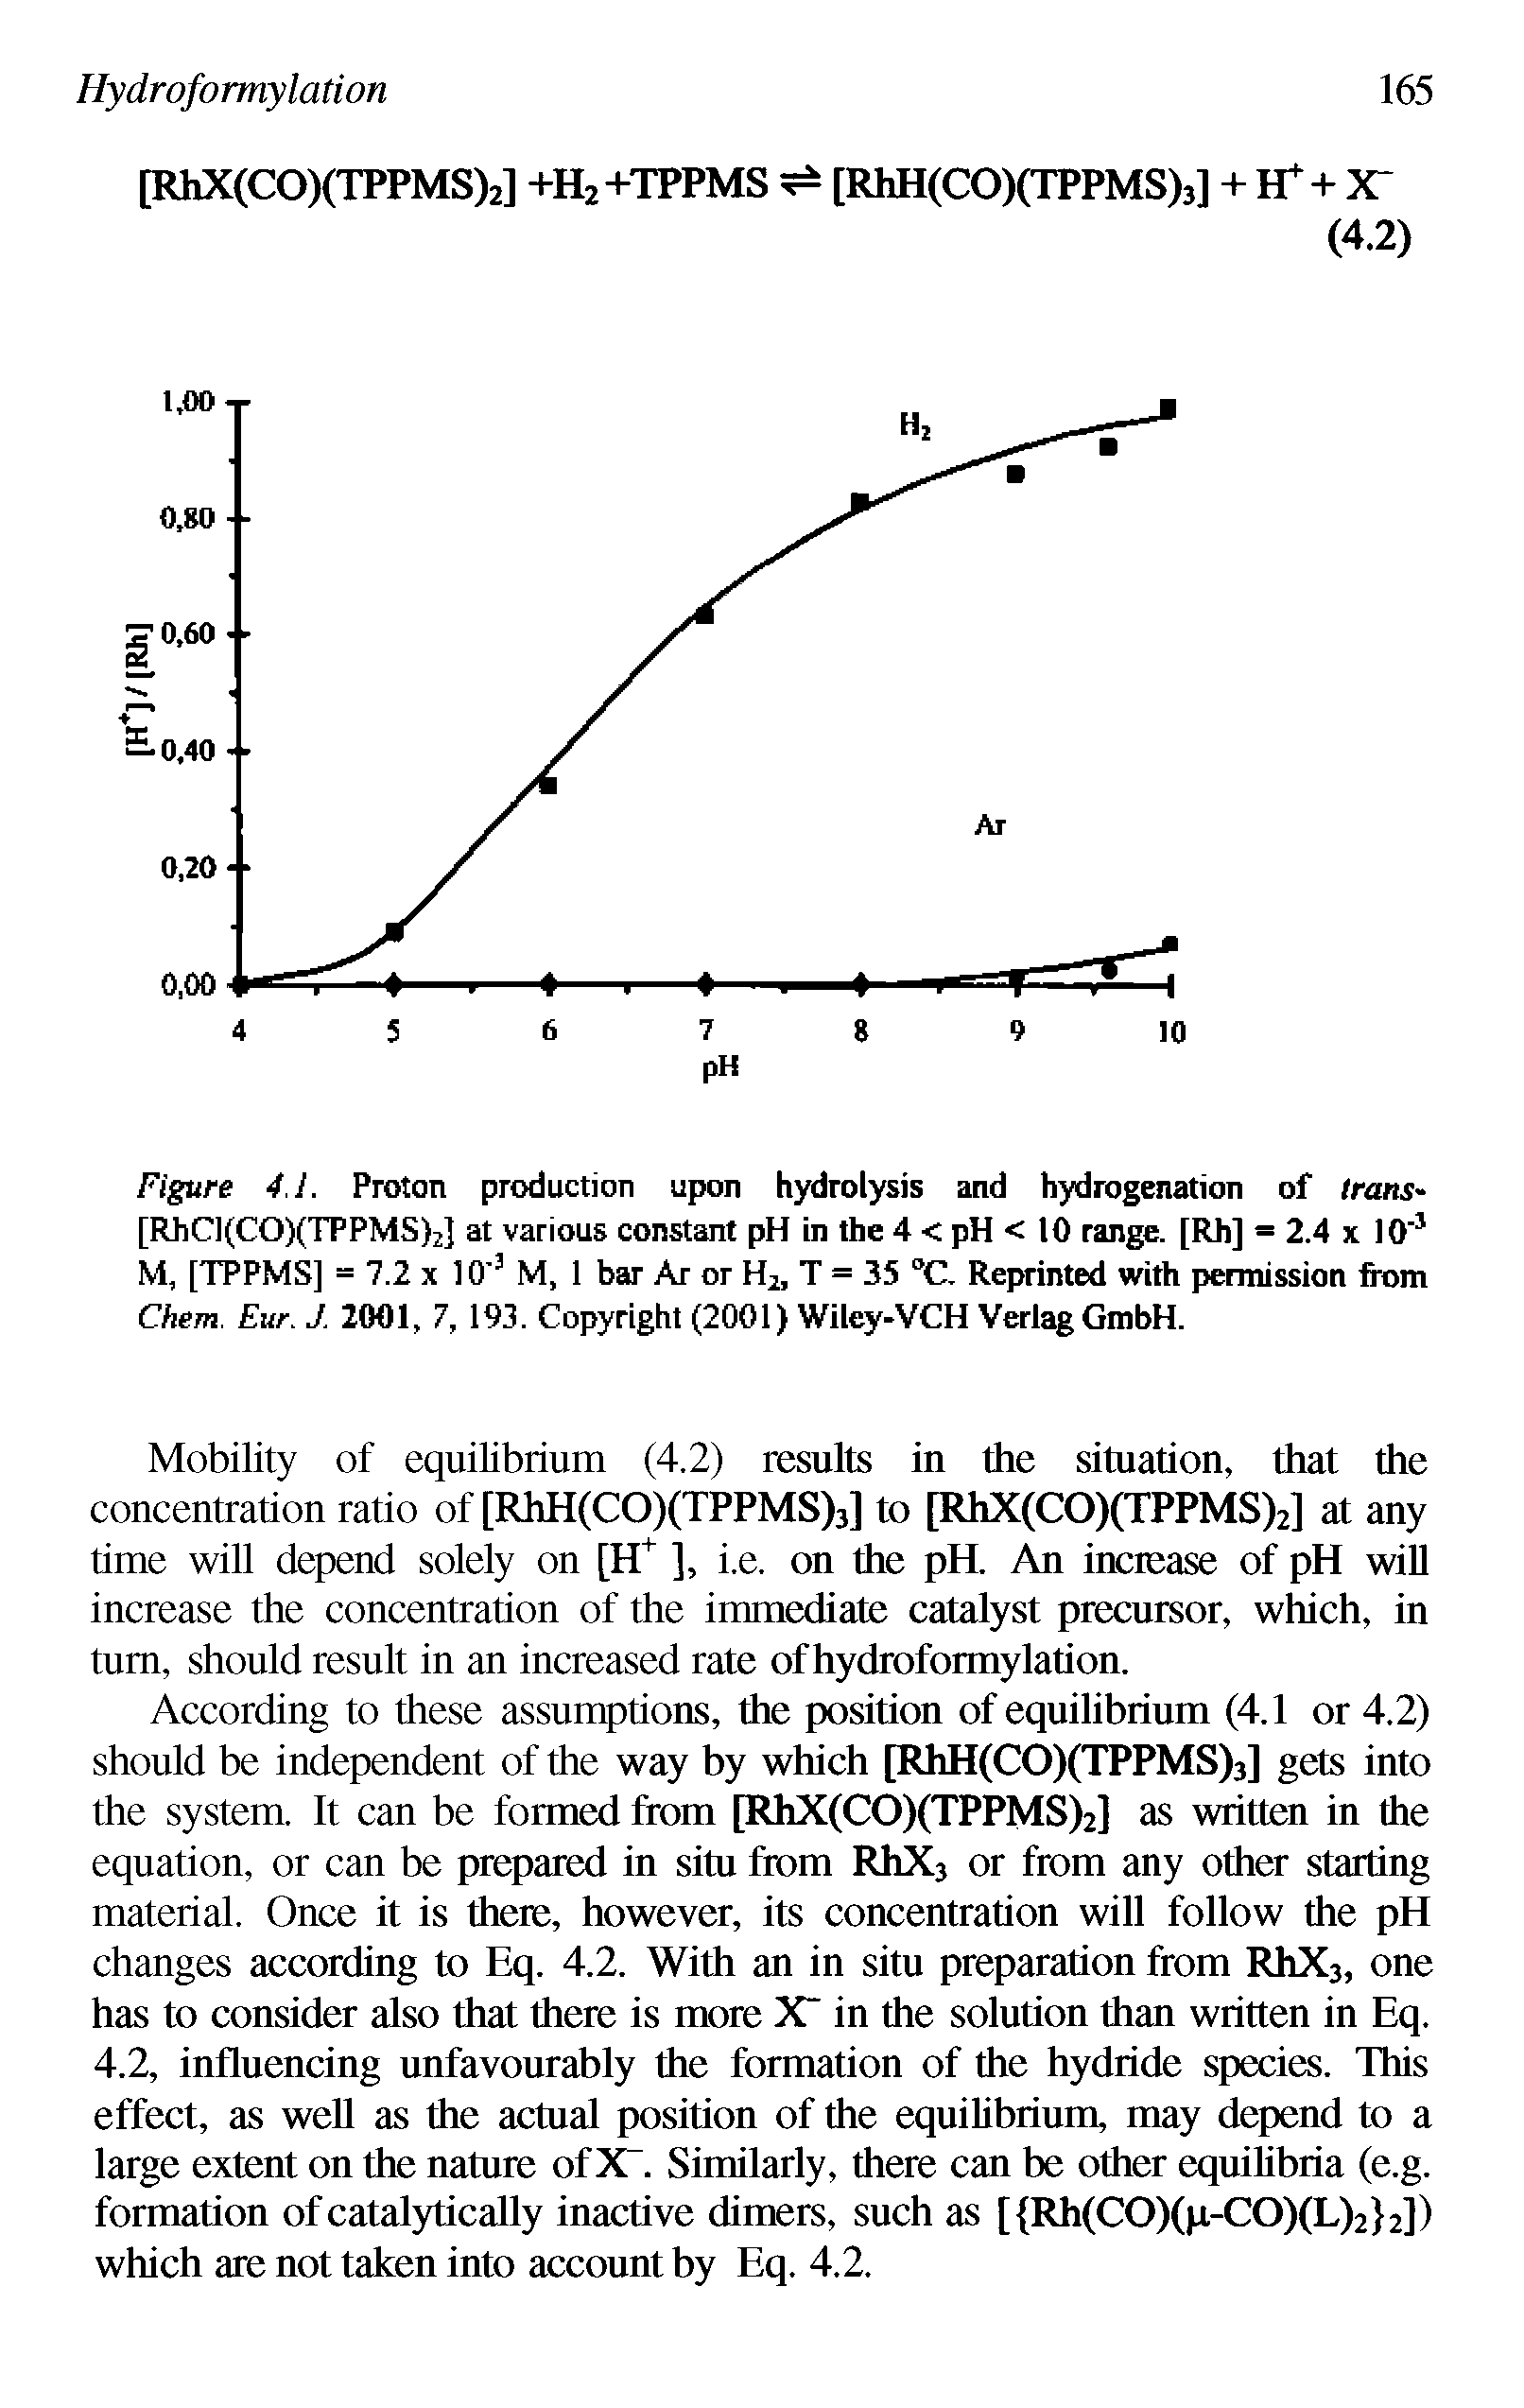 Figure 4.J. Proton production upon hydrolysis and hydrogenation of lrans [RhCl(CO)(TPPMS)2] at various constant pH in the 4 < pH < 10 range. [Rh] = 2.4 x 10" M, [TPPMS] = 7.2x10 M, 1 bar Ar or H, T = 35 "C, Reprinted with permission from Chem. Eur. J. 2001, 7, 193. Copyright (2001) Wiley-VCH VerlagGmbH.